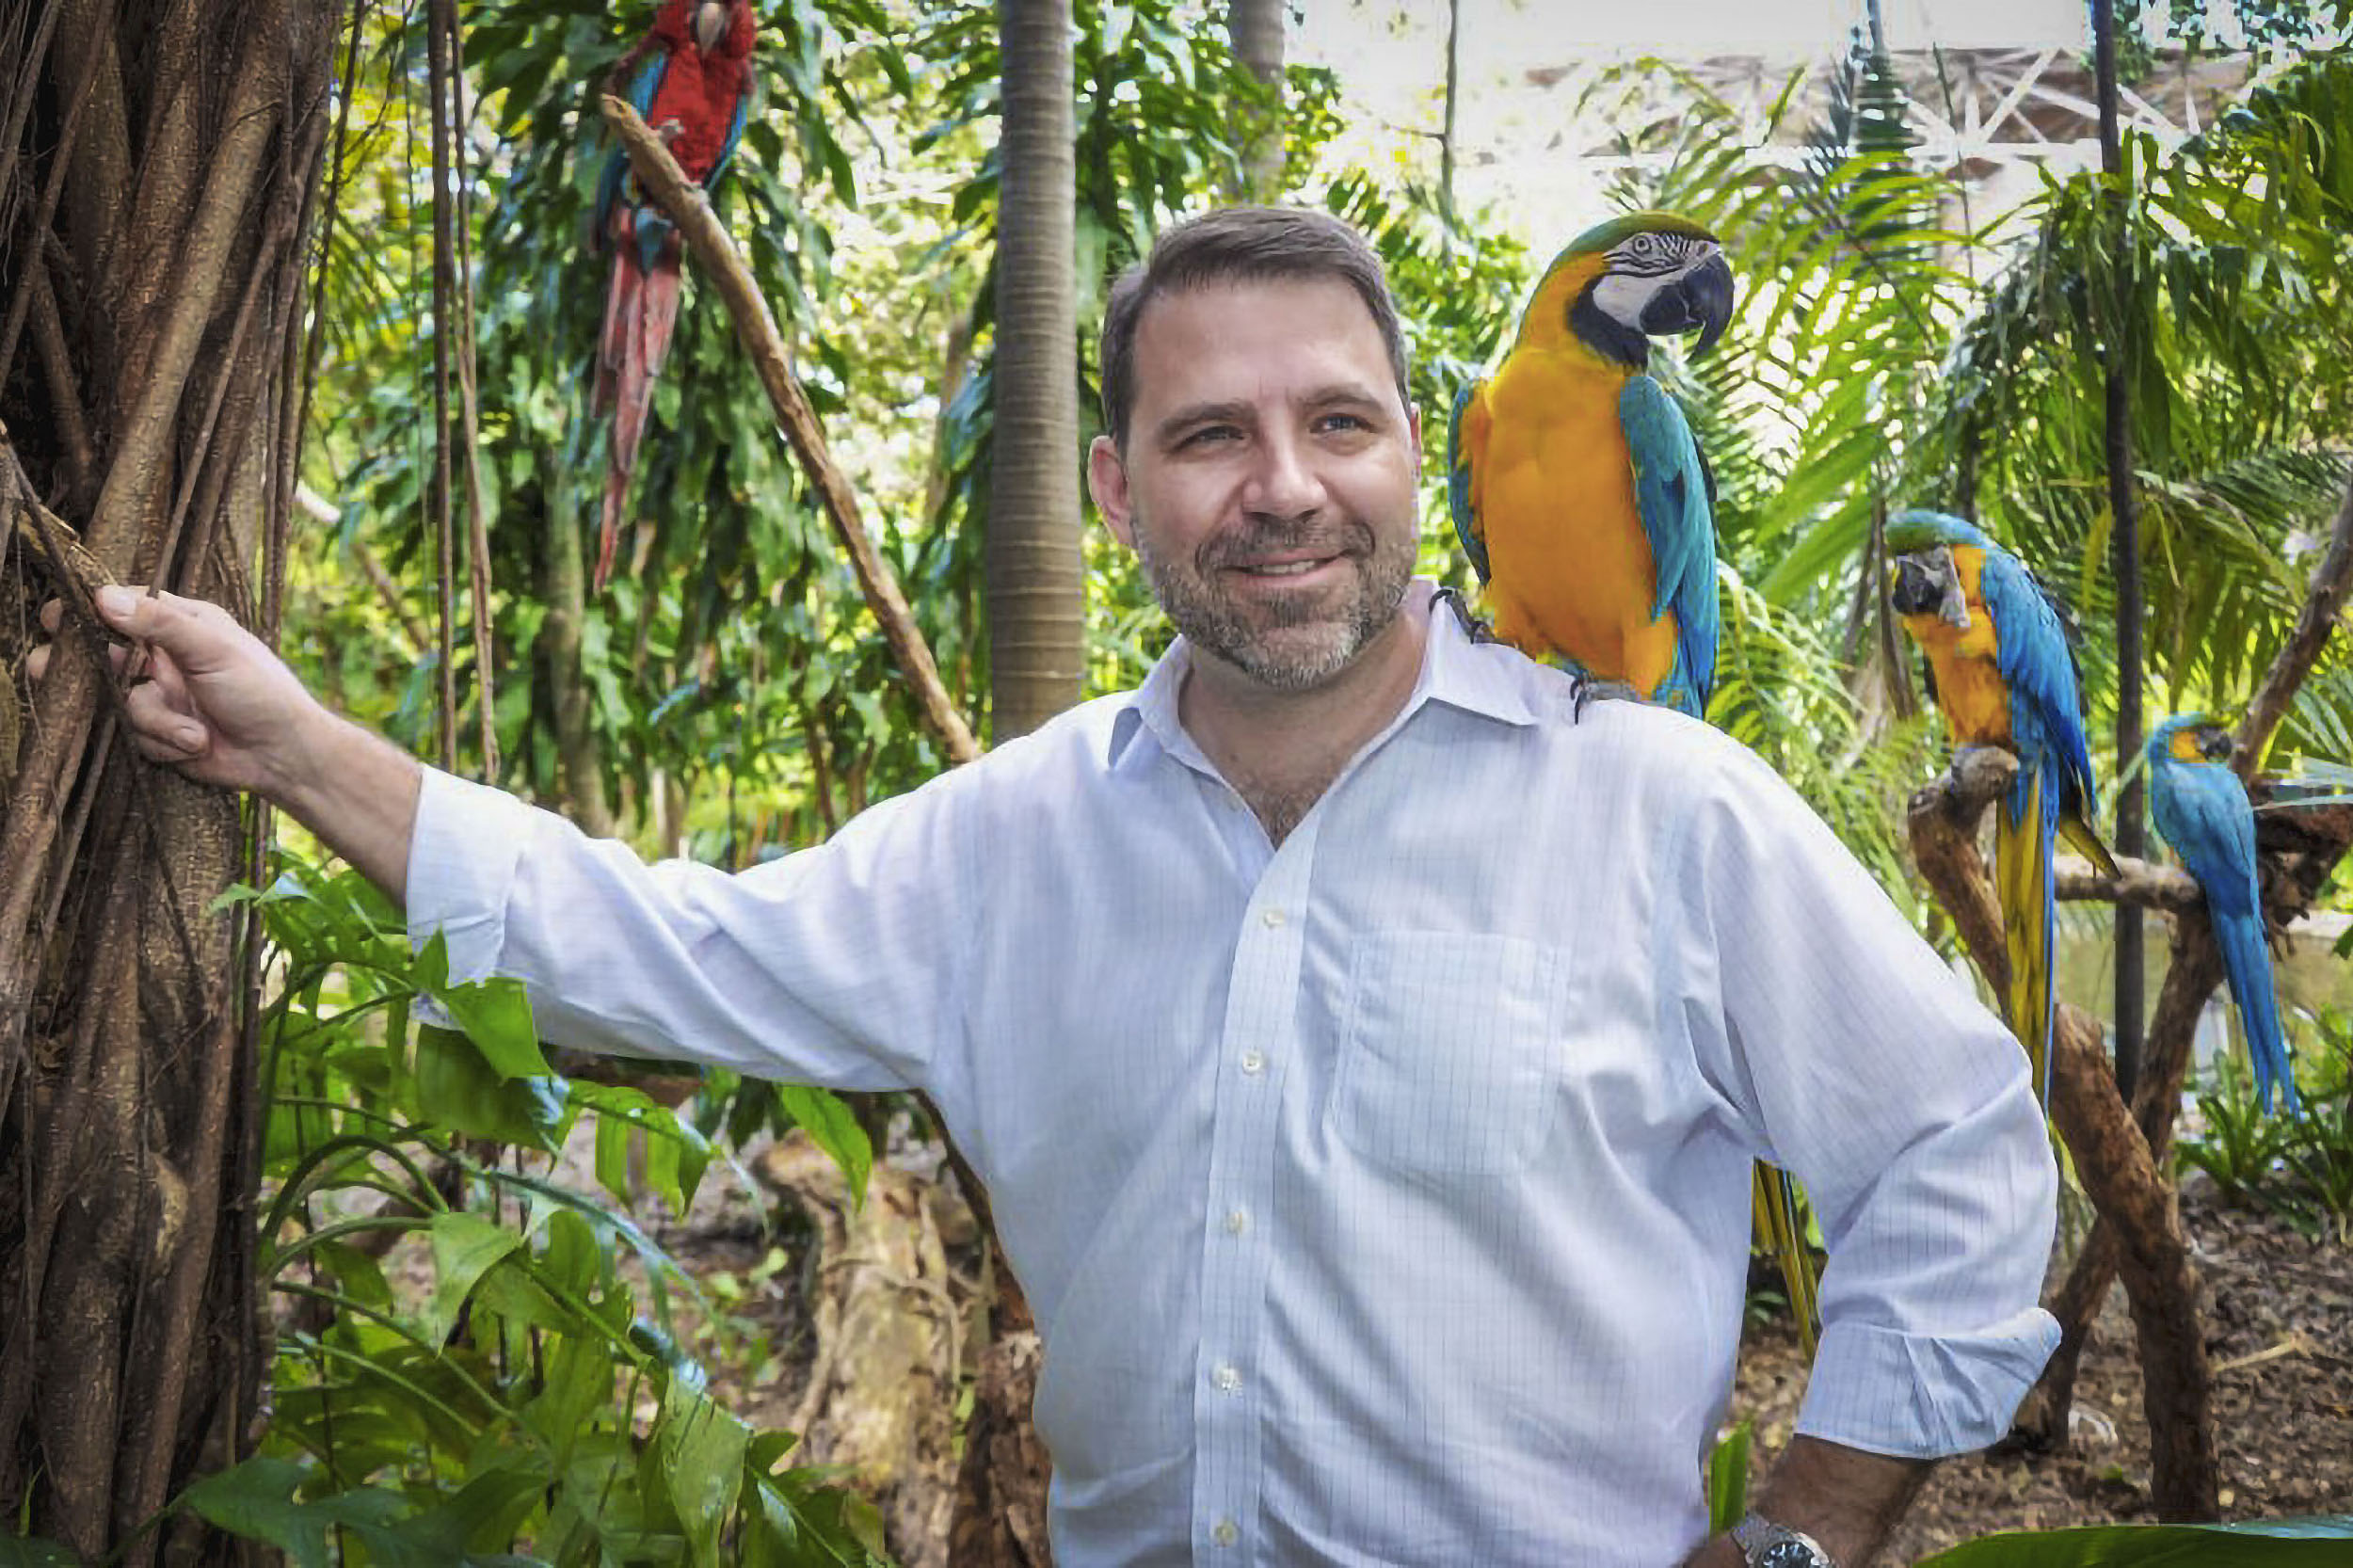 Dunlap standing next to a tree with parrot on his shoulder and parrots around him